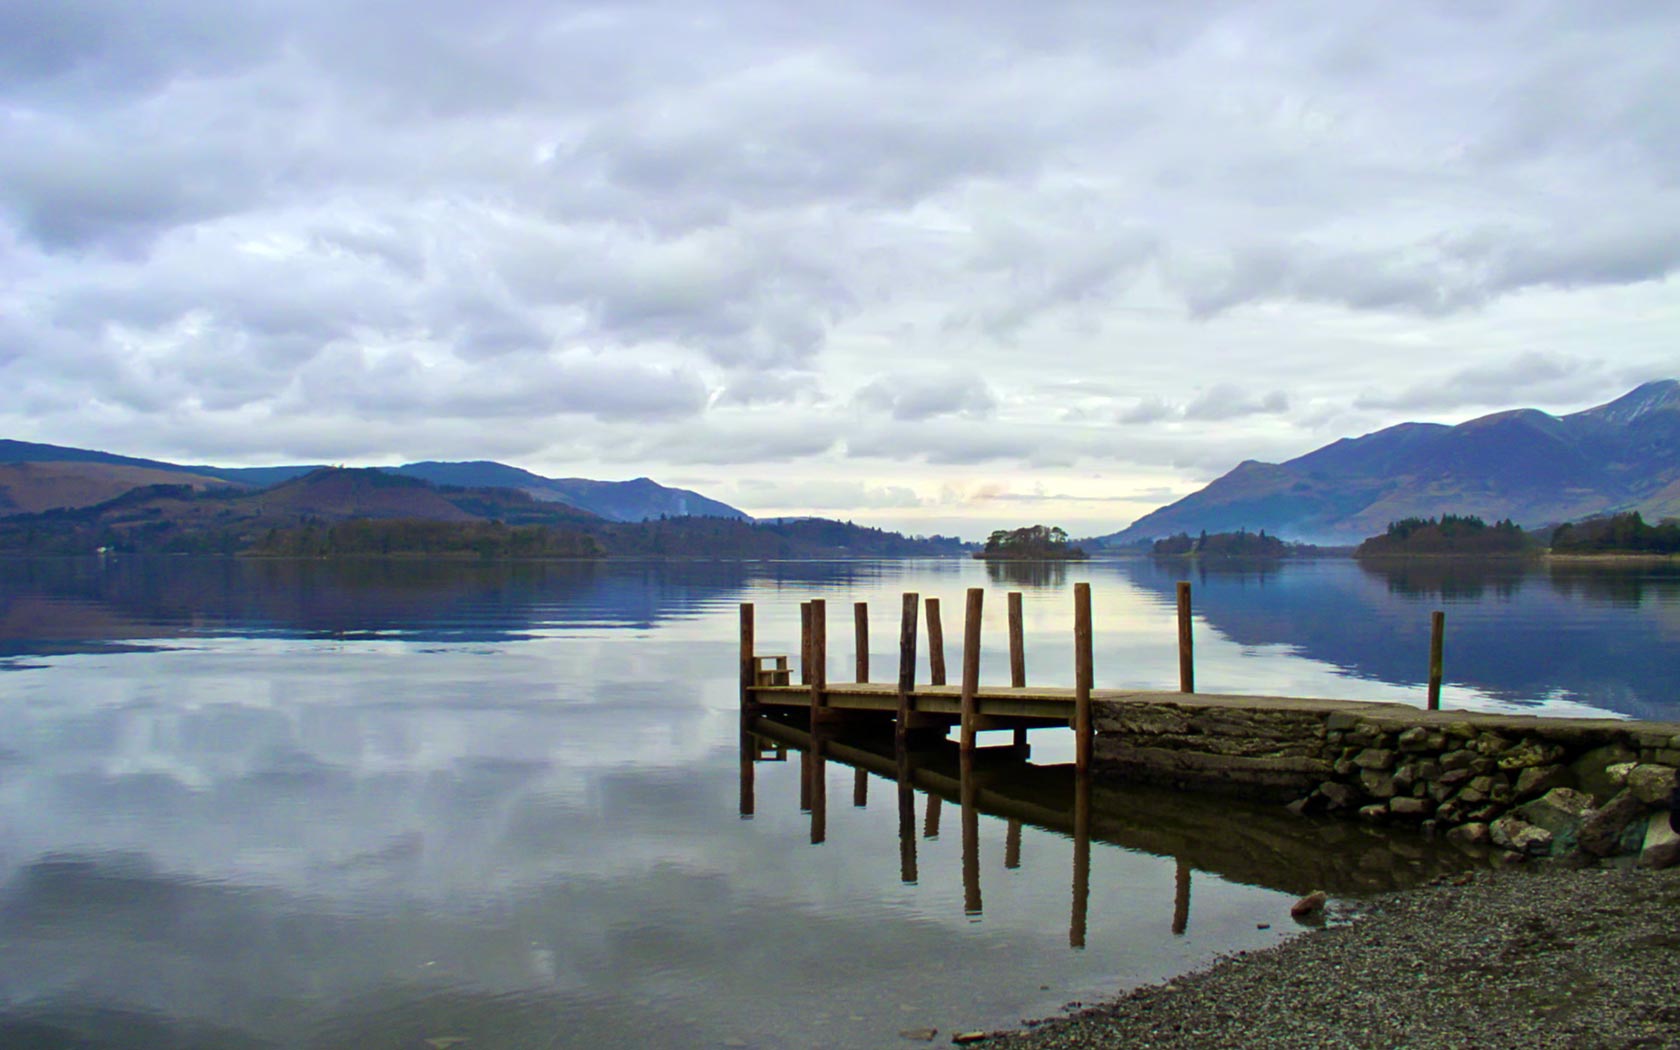 Desktop backgrounds of Derwent Water boat Jetty on a calm winters day